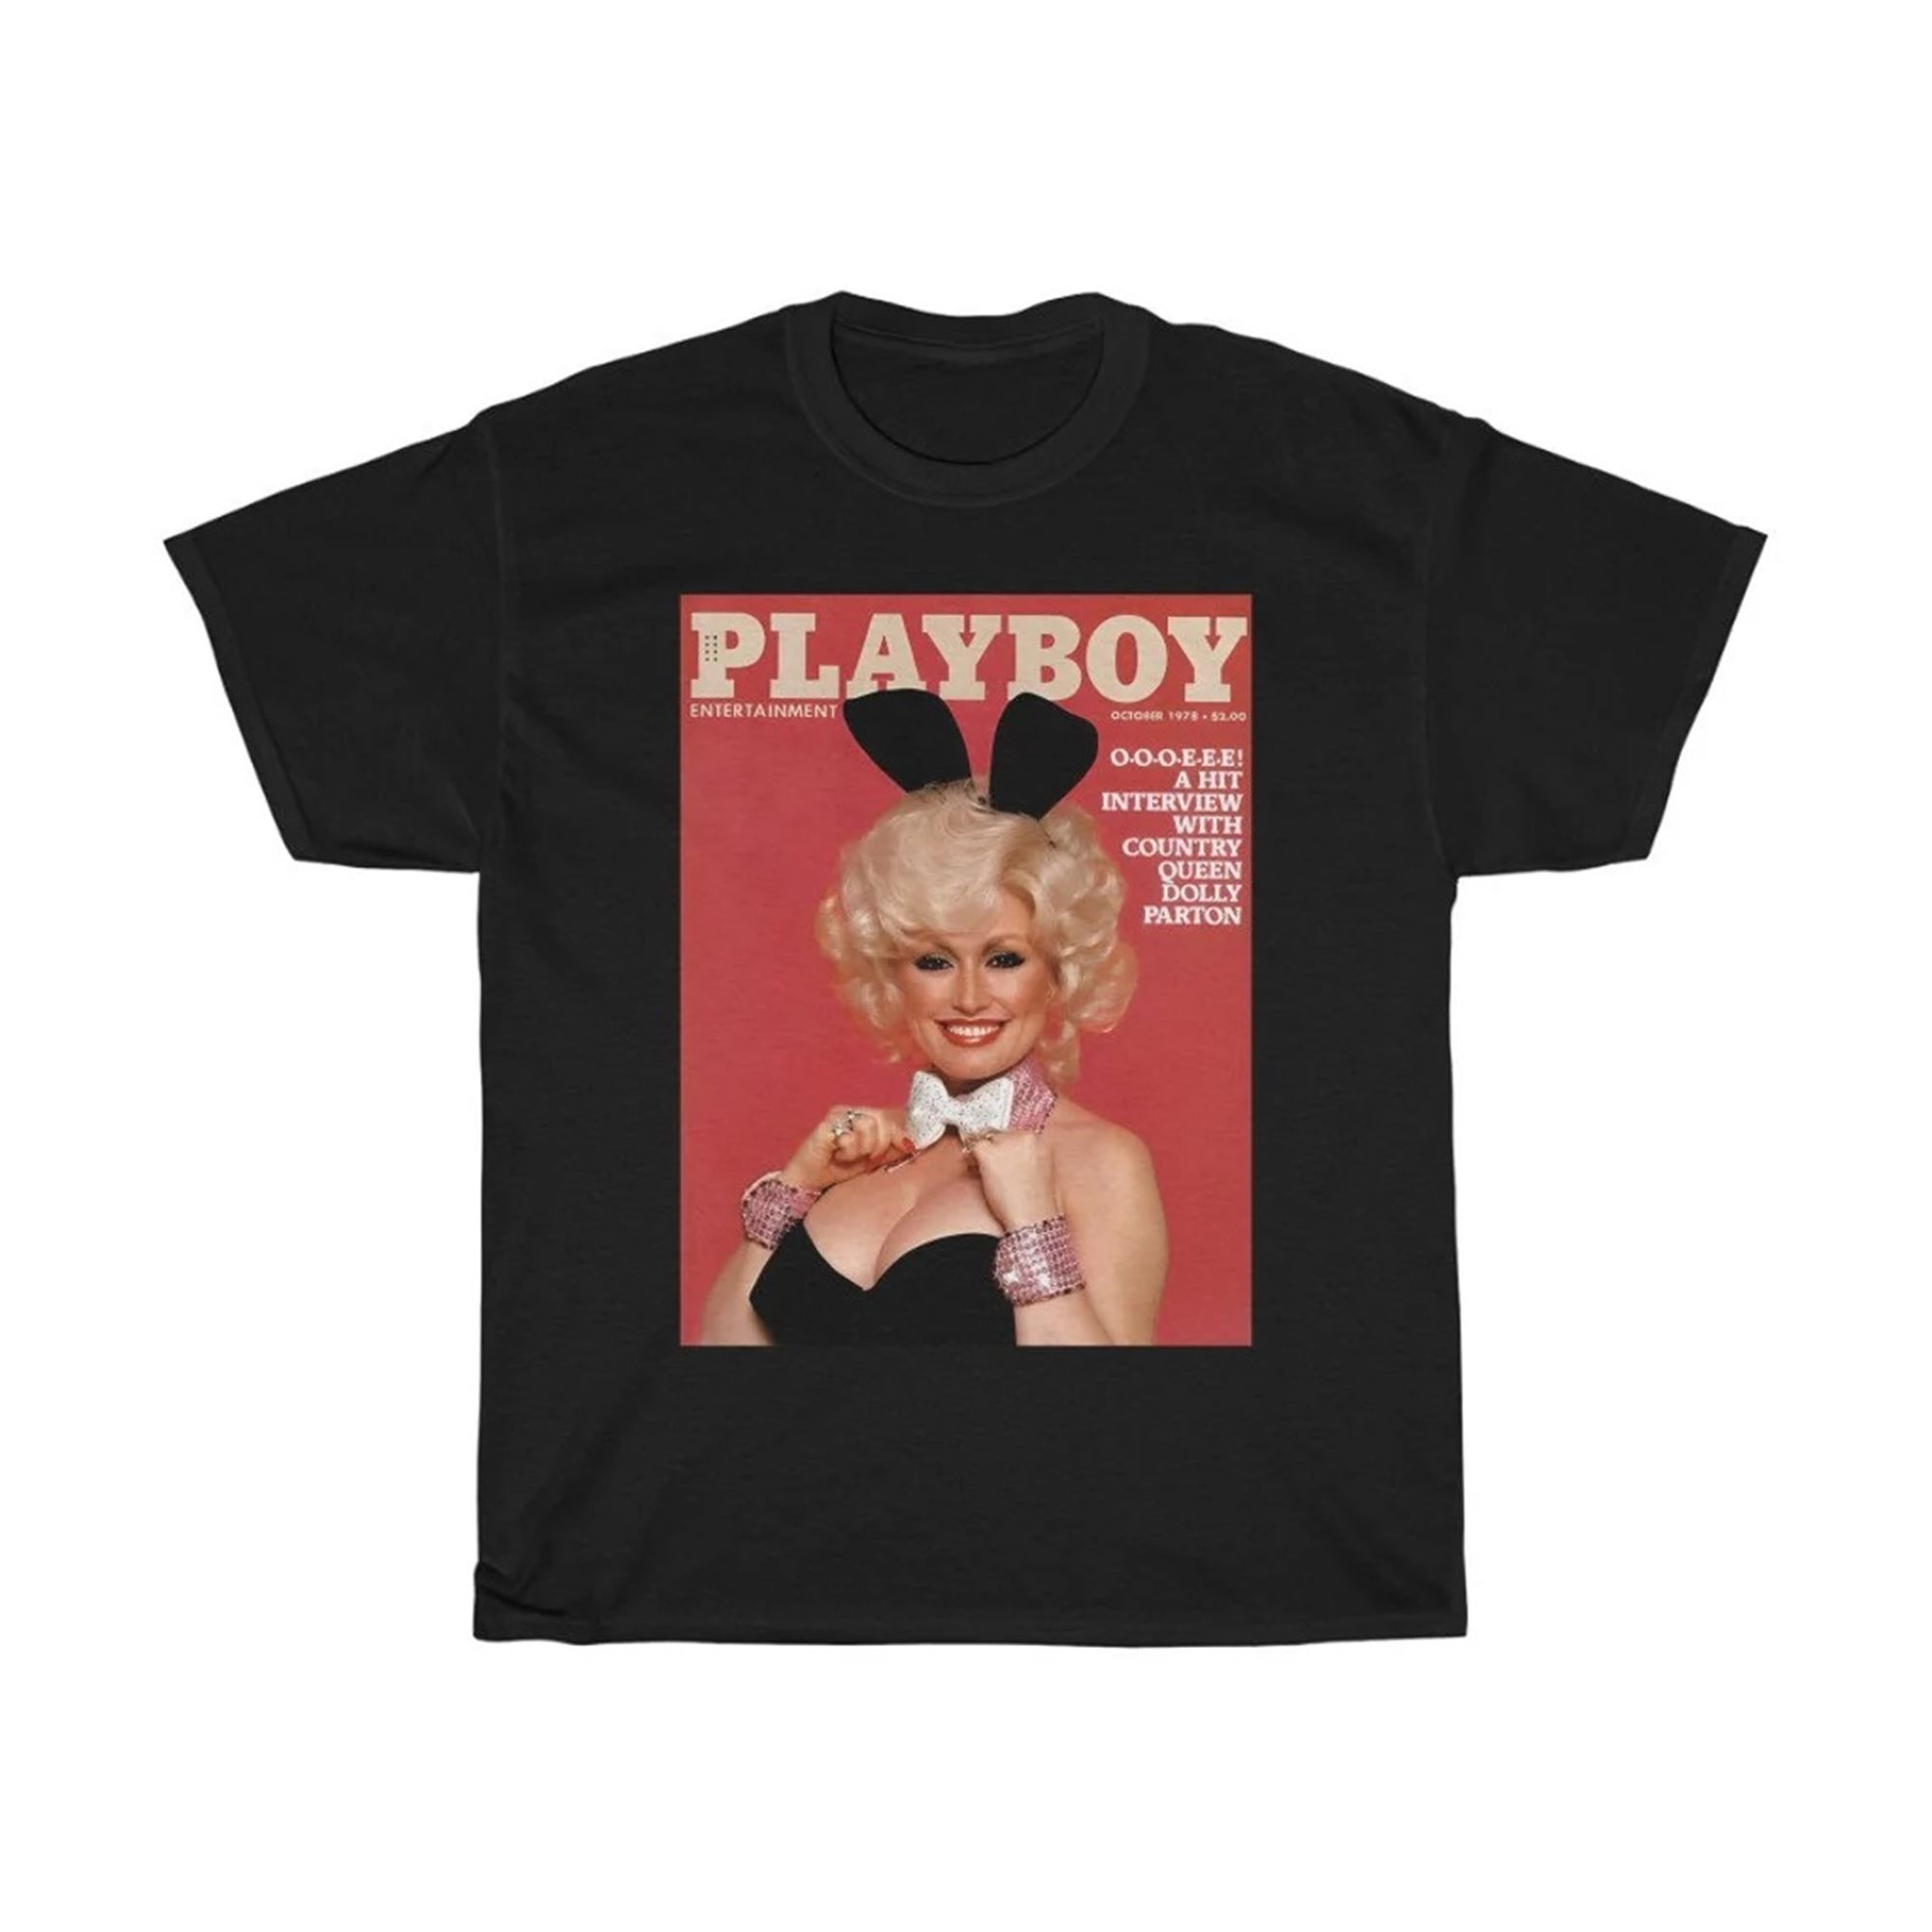 Dolly Parton Playboy Vintage T-shirtdolly Parton Shirt Cowgirl Shirt Retro Gift Tee For You And Your Friends Full Size Up To 5xl